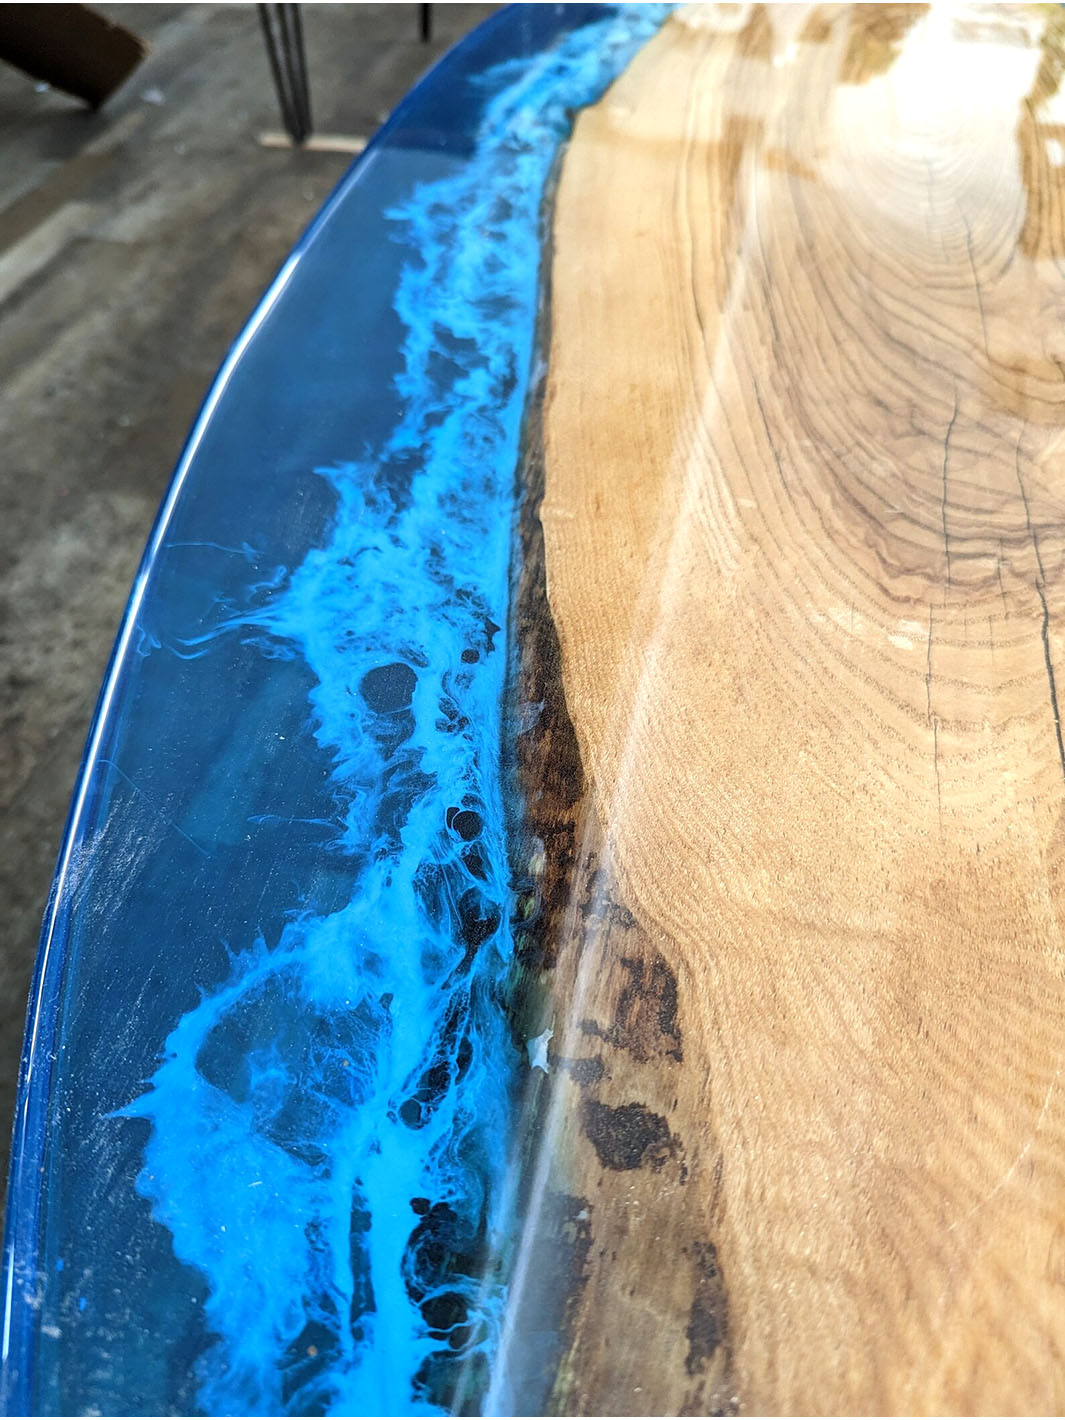 Oval Epoxy Coffee Table With Ocean Epoxy Design